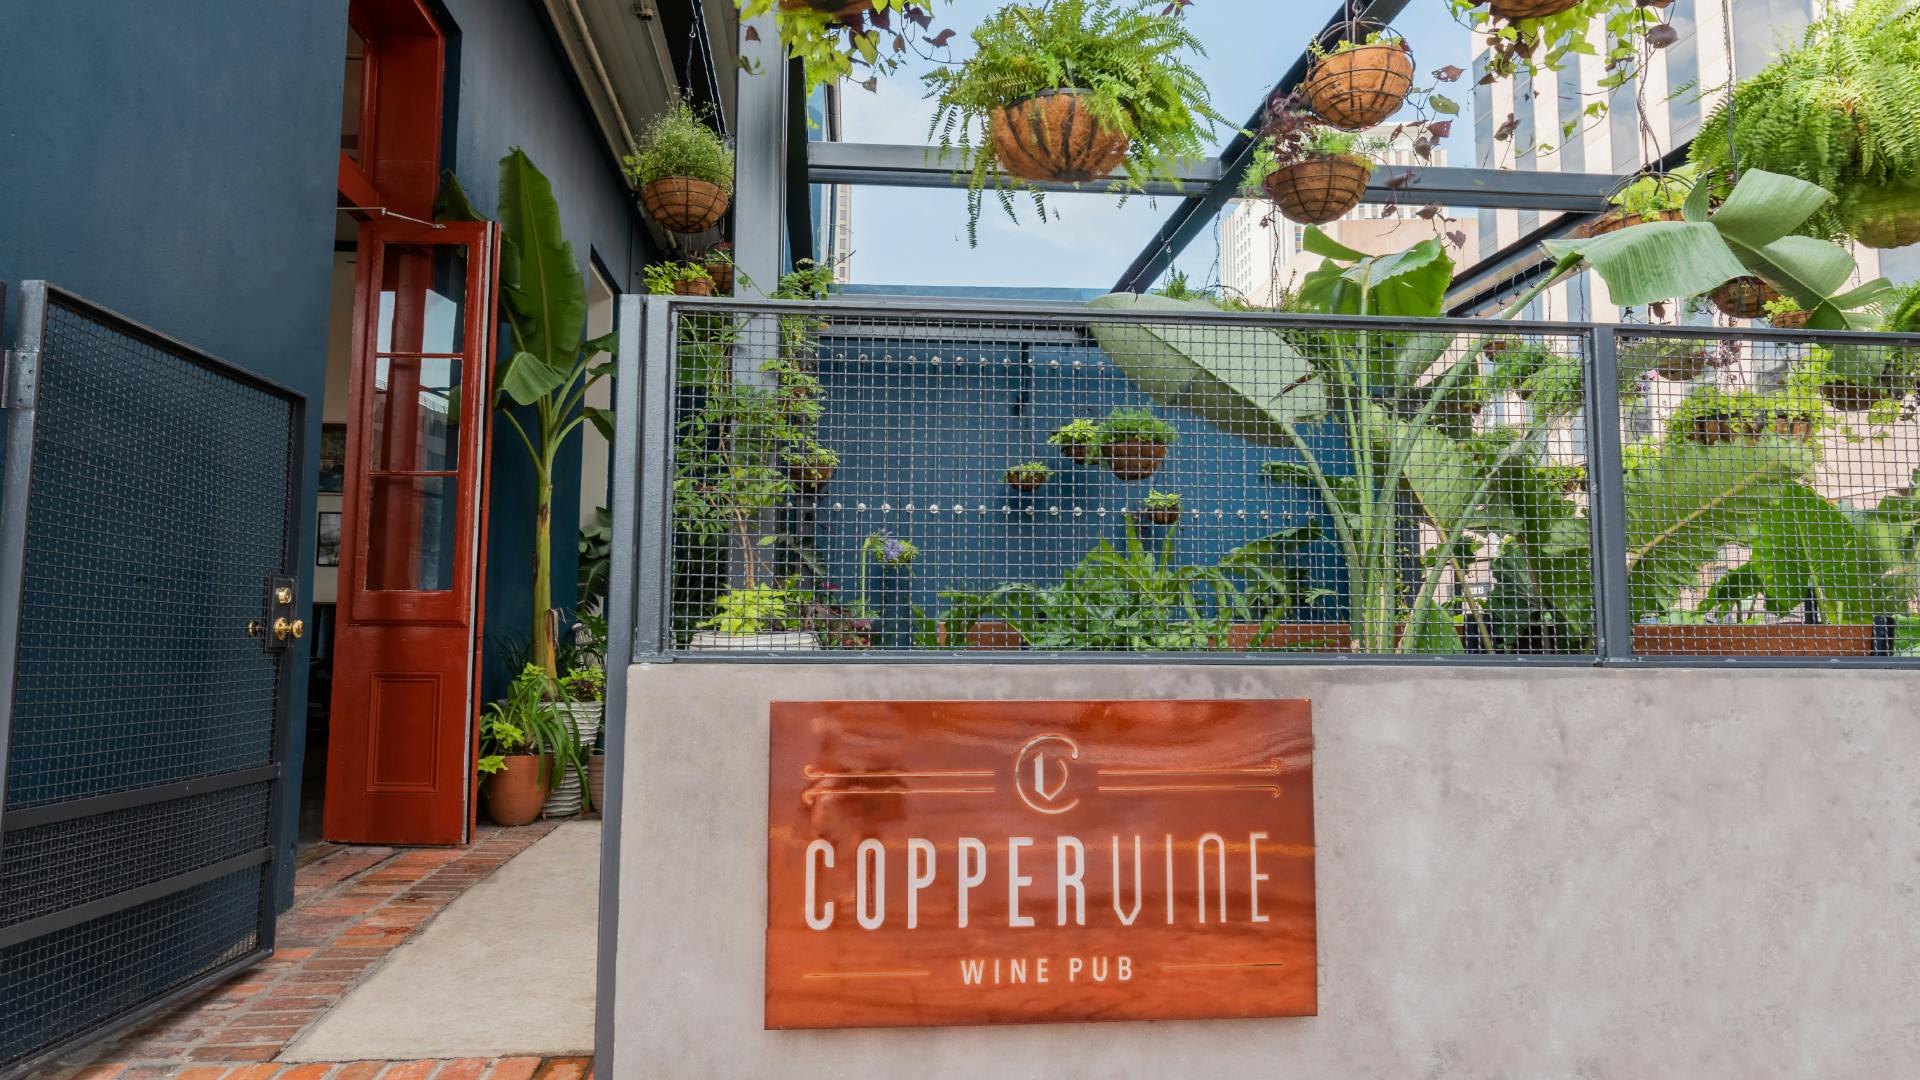 Coppervine sign attached to concrete wall with lush tropical planting from courtyard in the background.